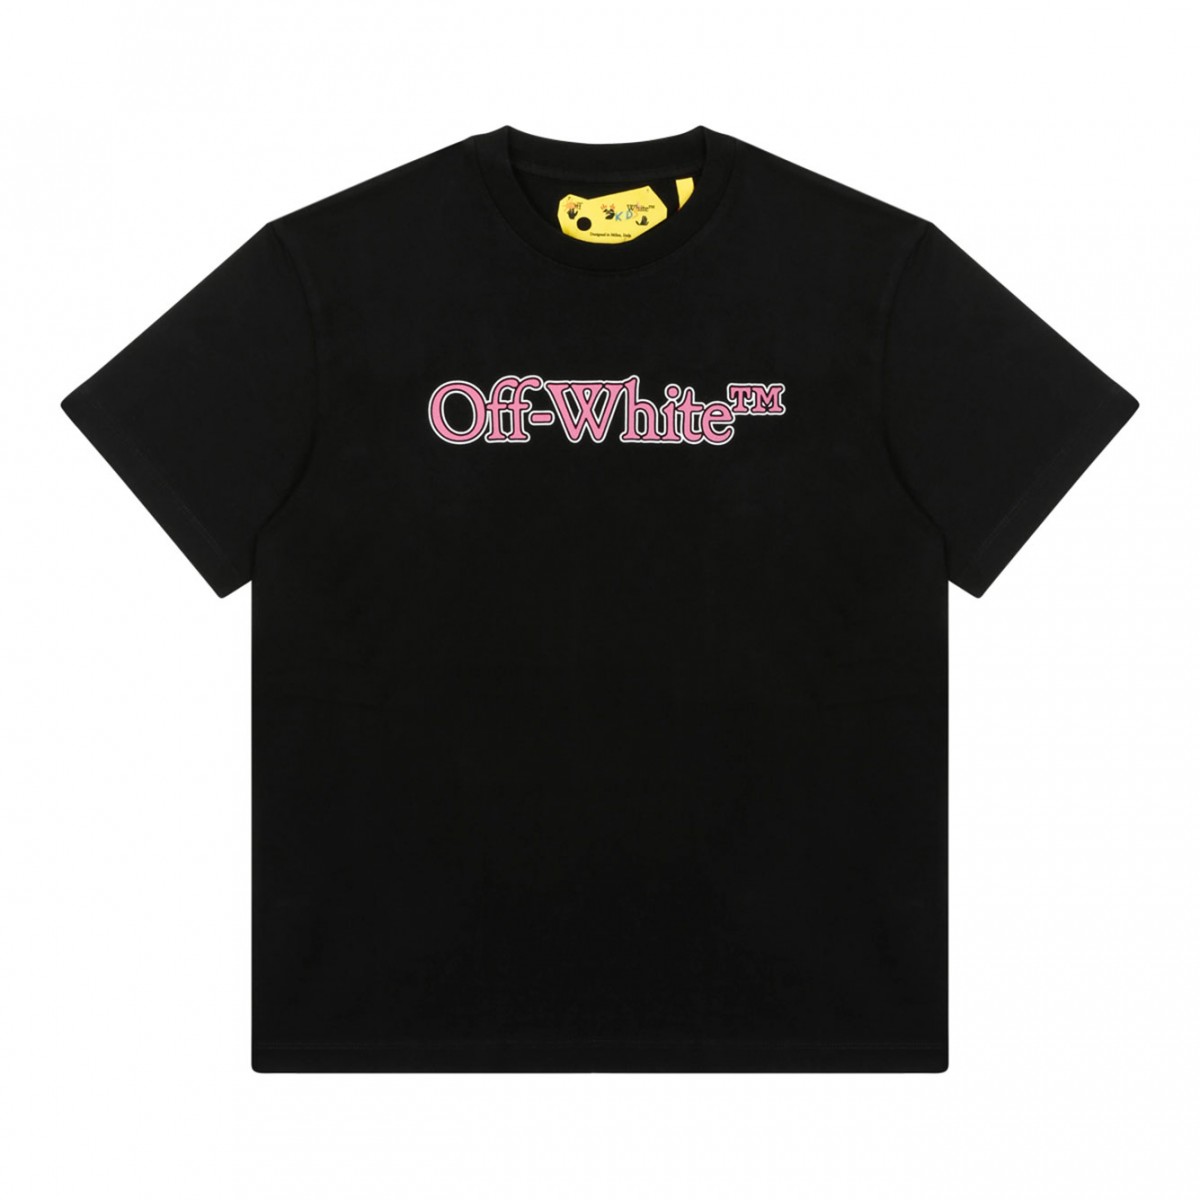 Black and Pink T-Shirt